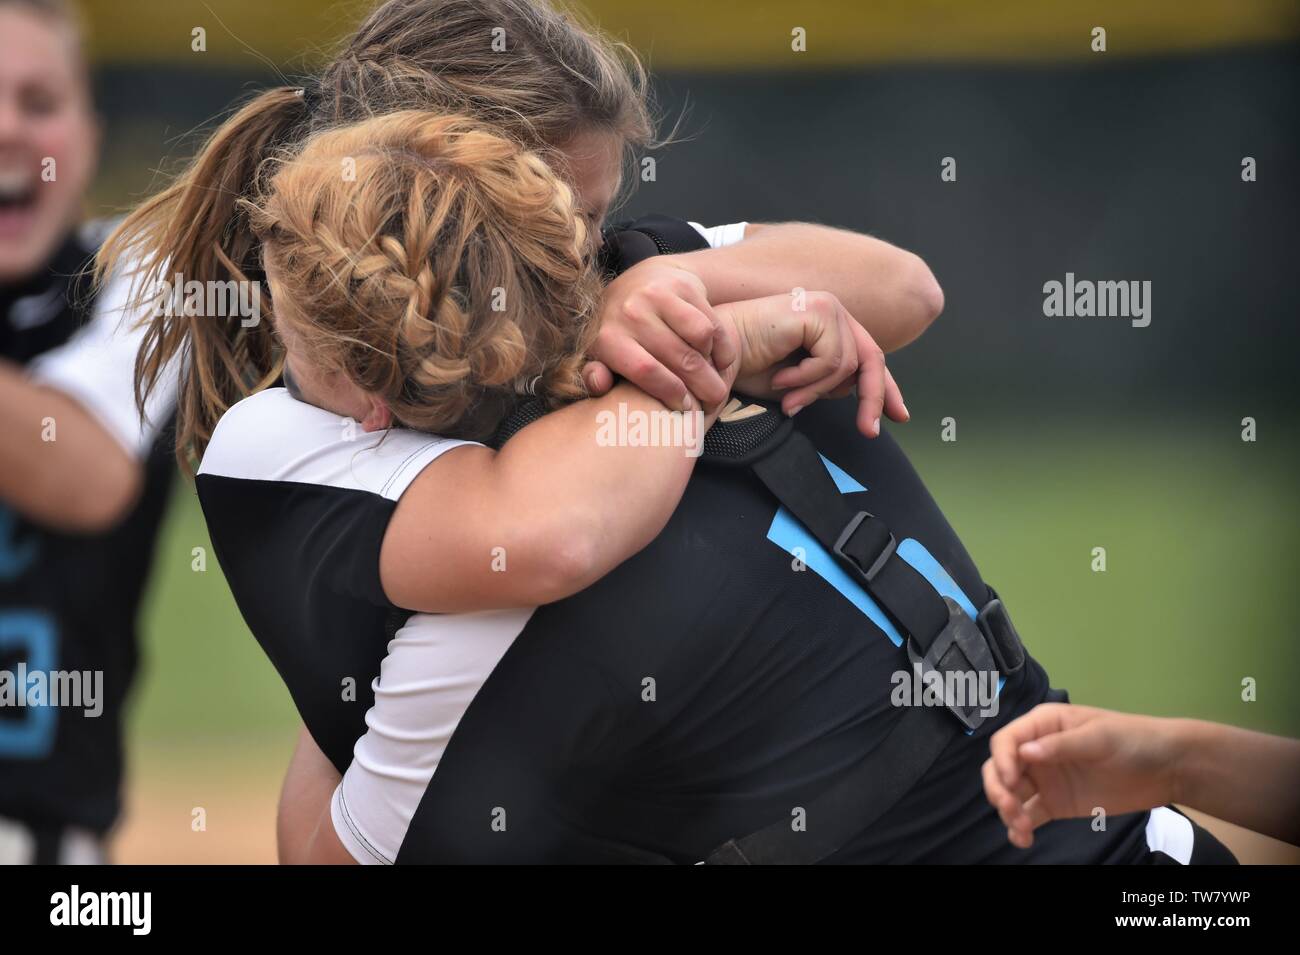 Battery mates embrace immediately after the final out of their team's sectional championship win. USA. Stock Photo